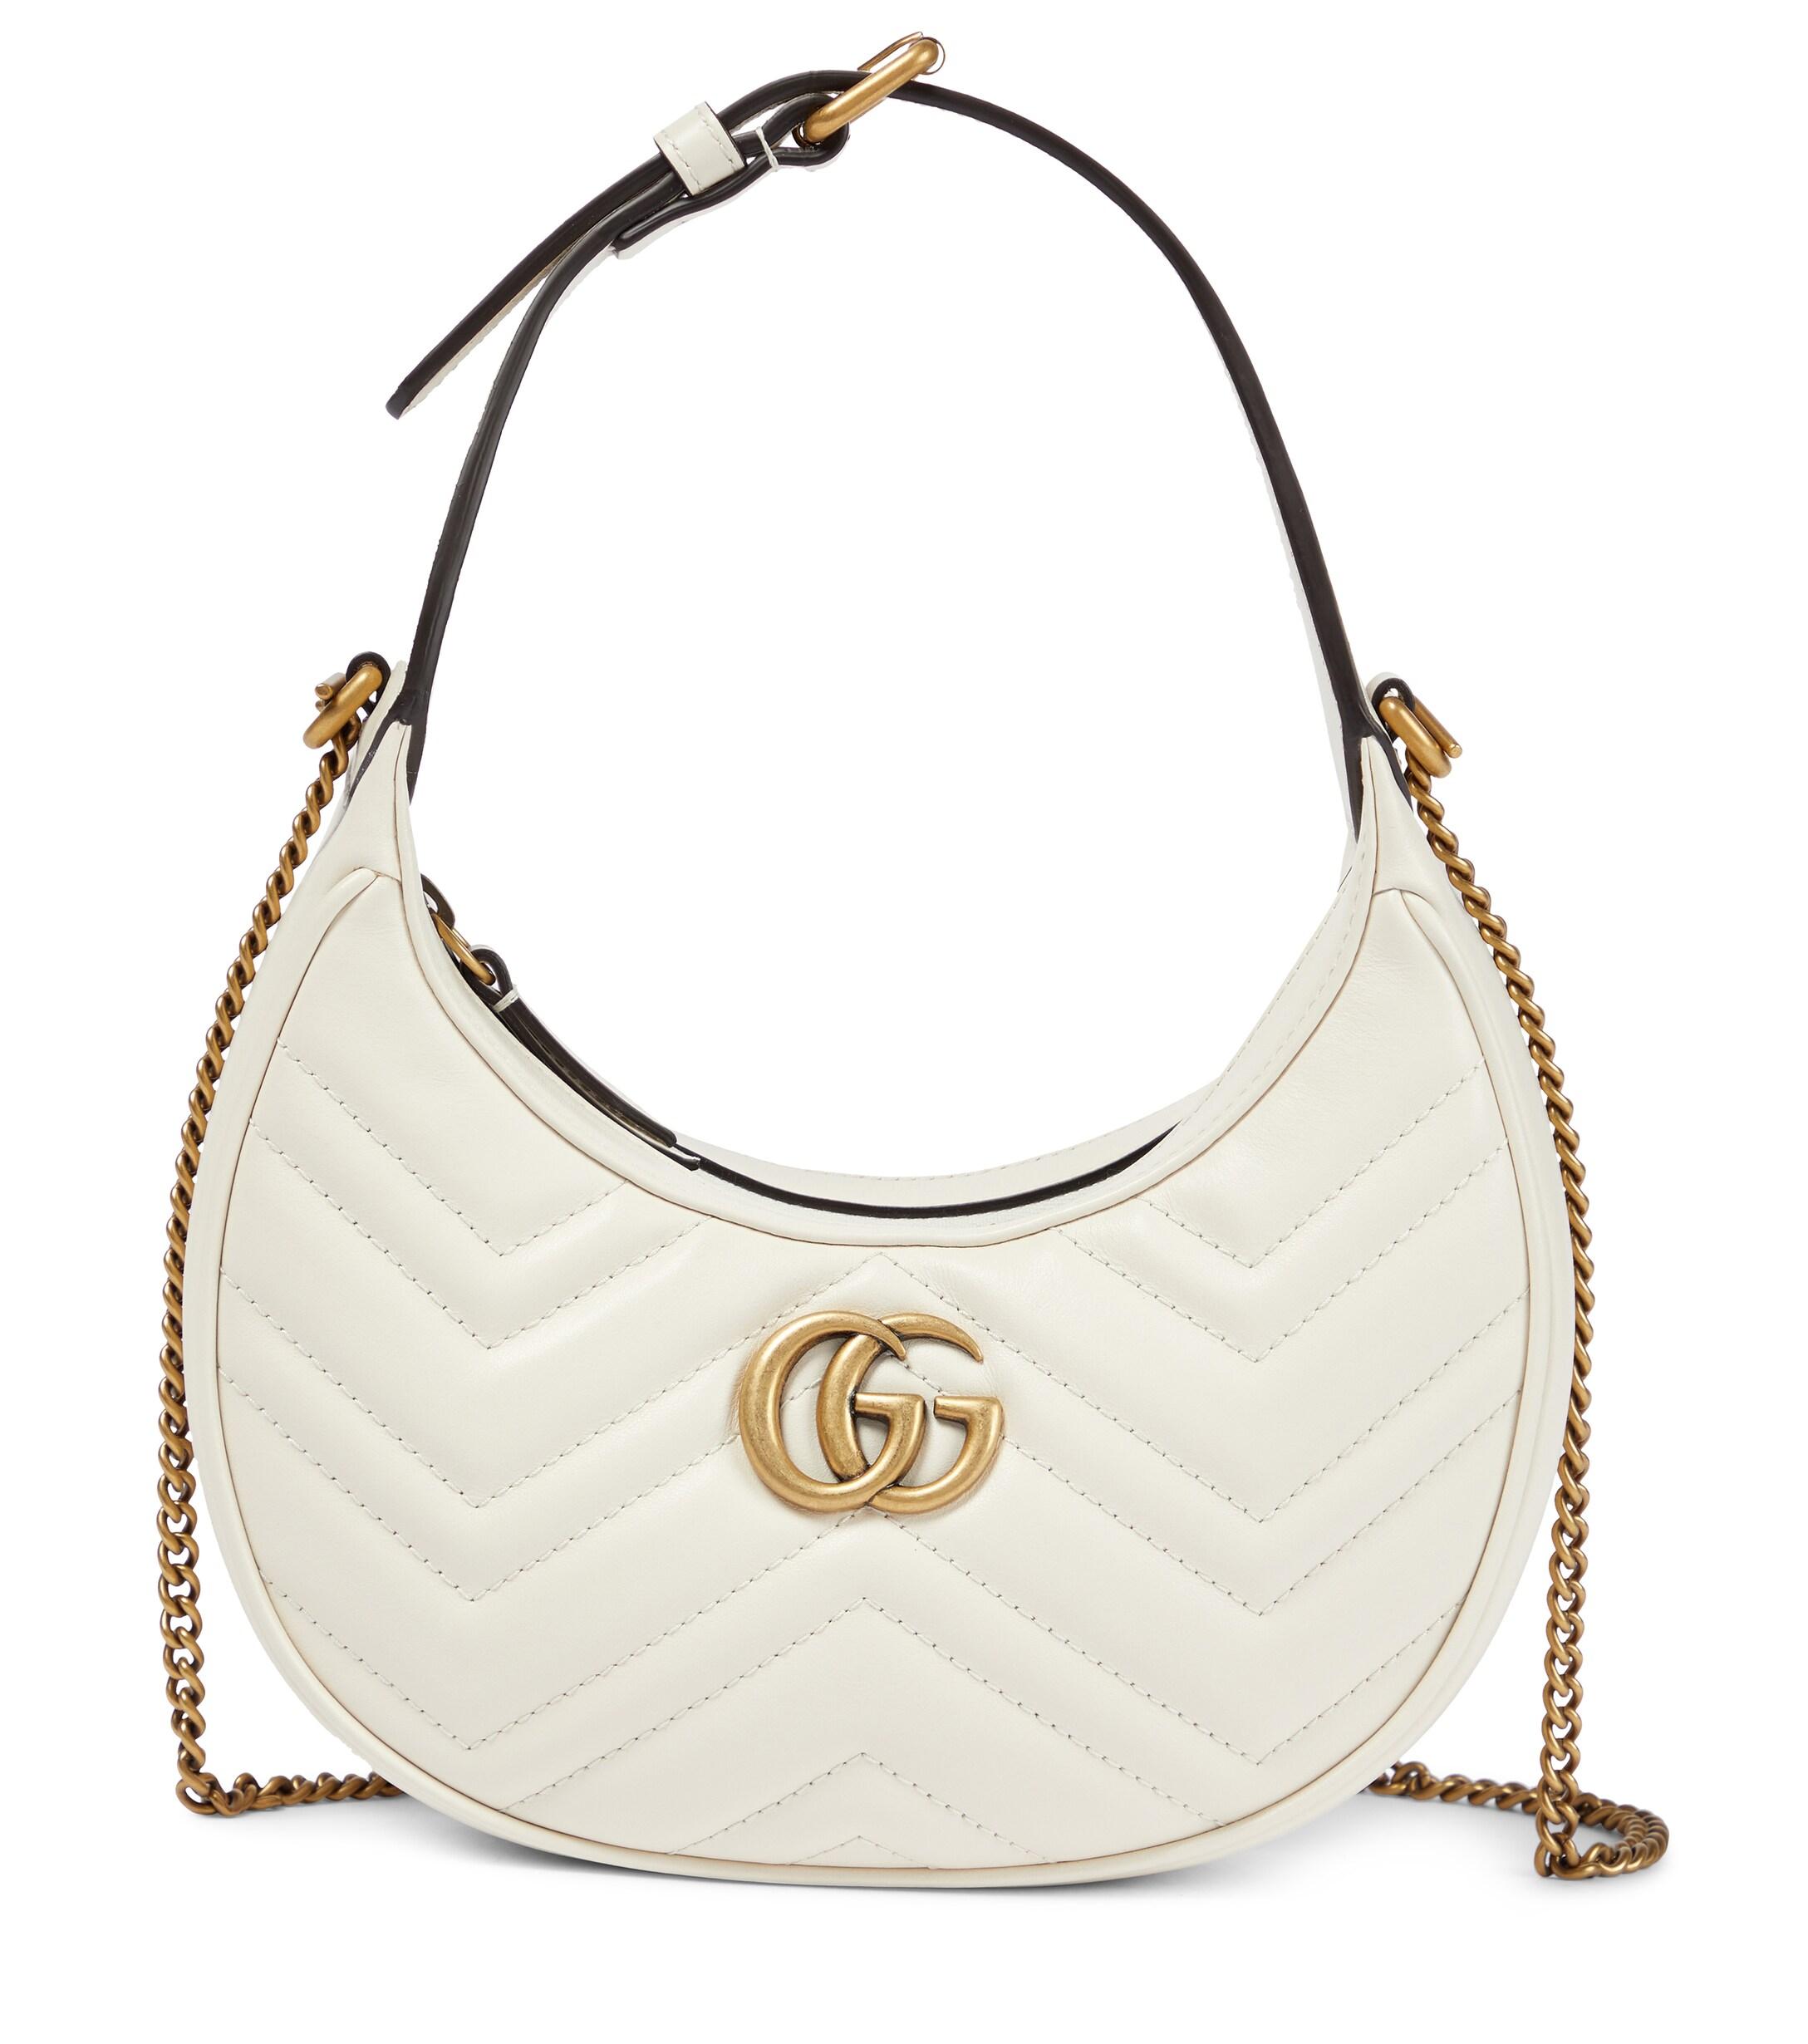 Gucci GG Marmont Mini Leather Shoulder Bag in White | Lyst Canada